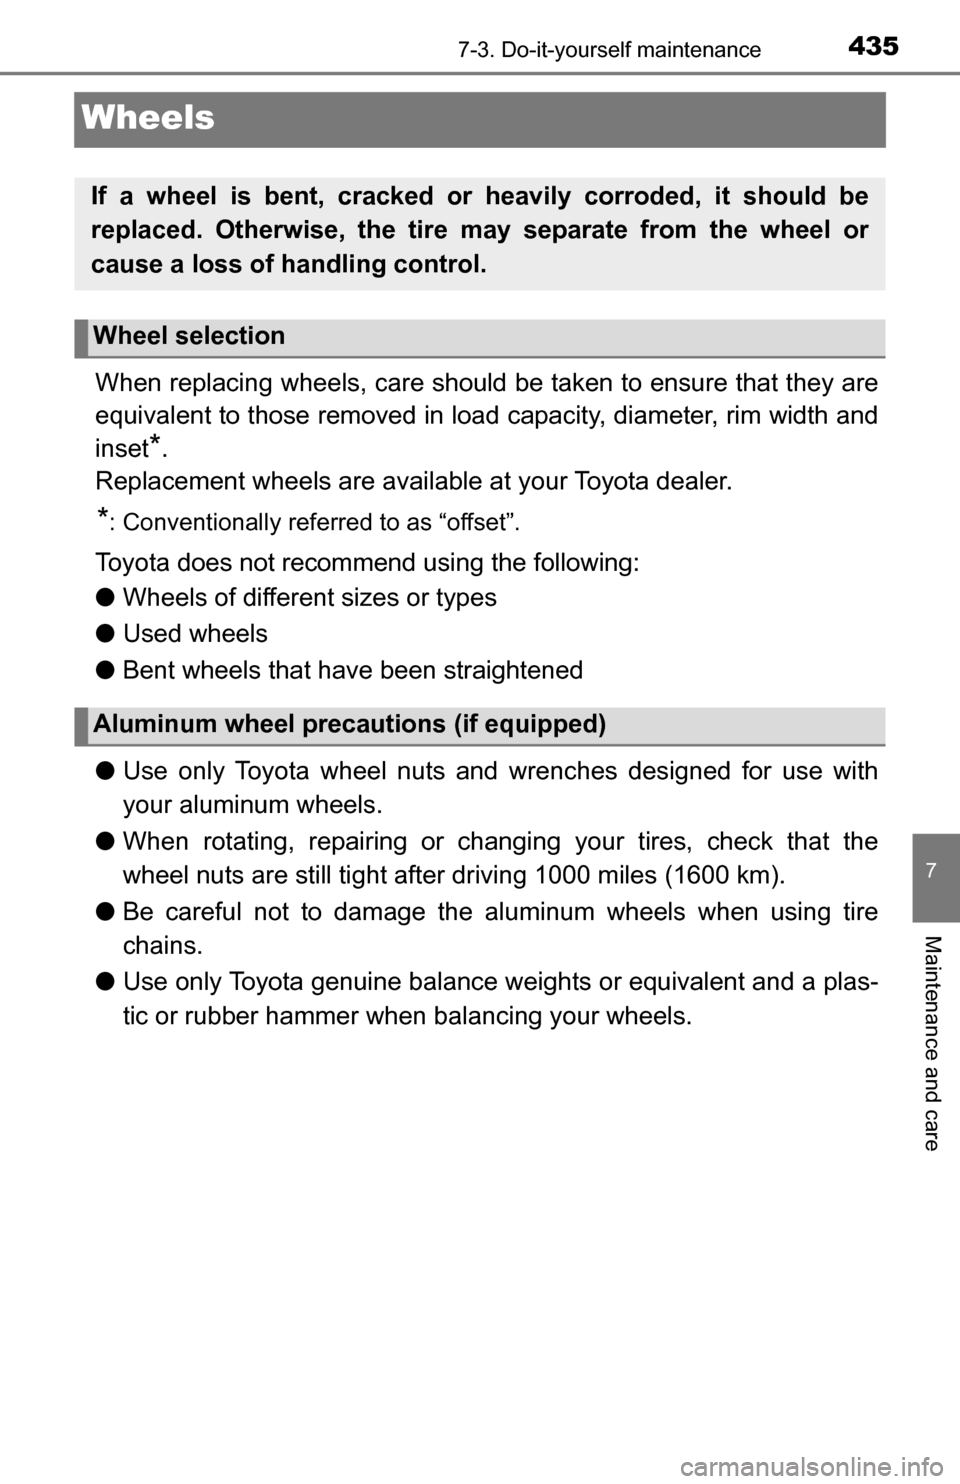 TOYOTA TUNDRA 2016 2.G Owners Manual 4357-3. Do-it-yourself maintenance
7
Maintenance and care
Wheels
When replacing wheels, care should be taken to ensure that they are
equivalent to those removed in load capacity, diameter, rim width a